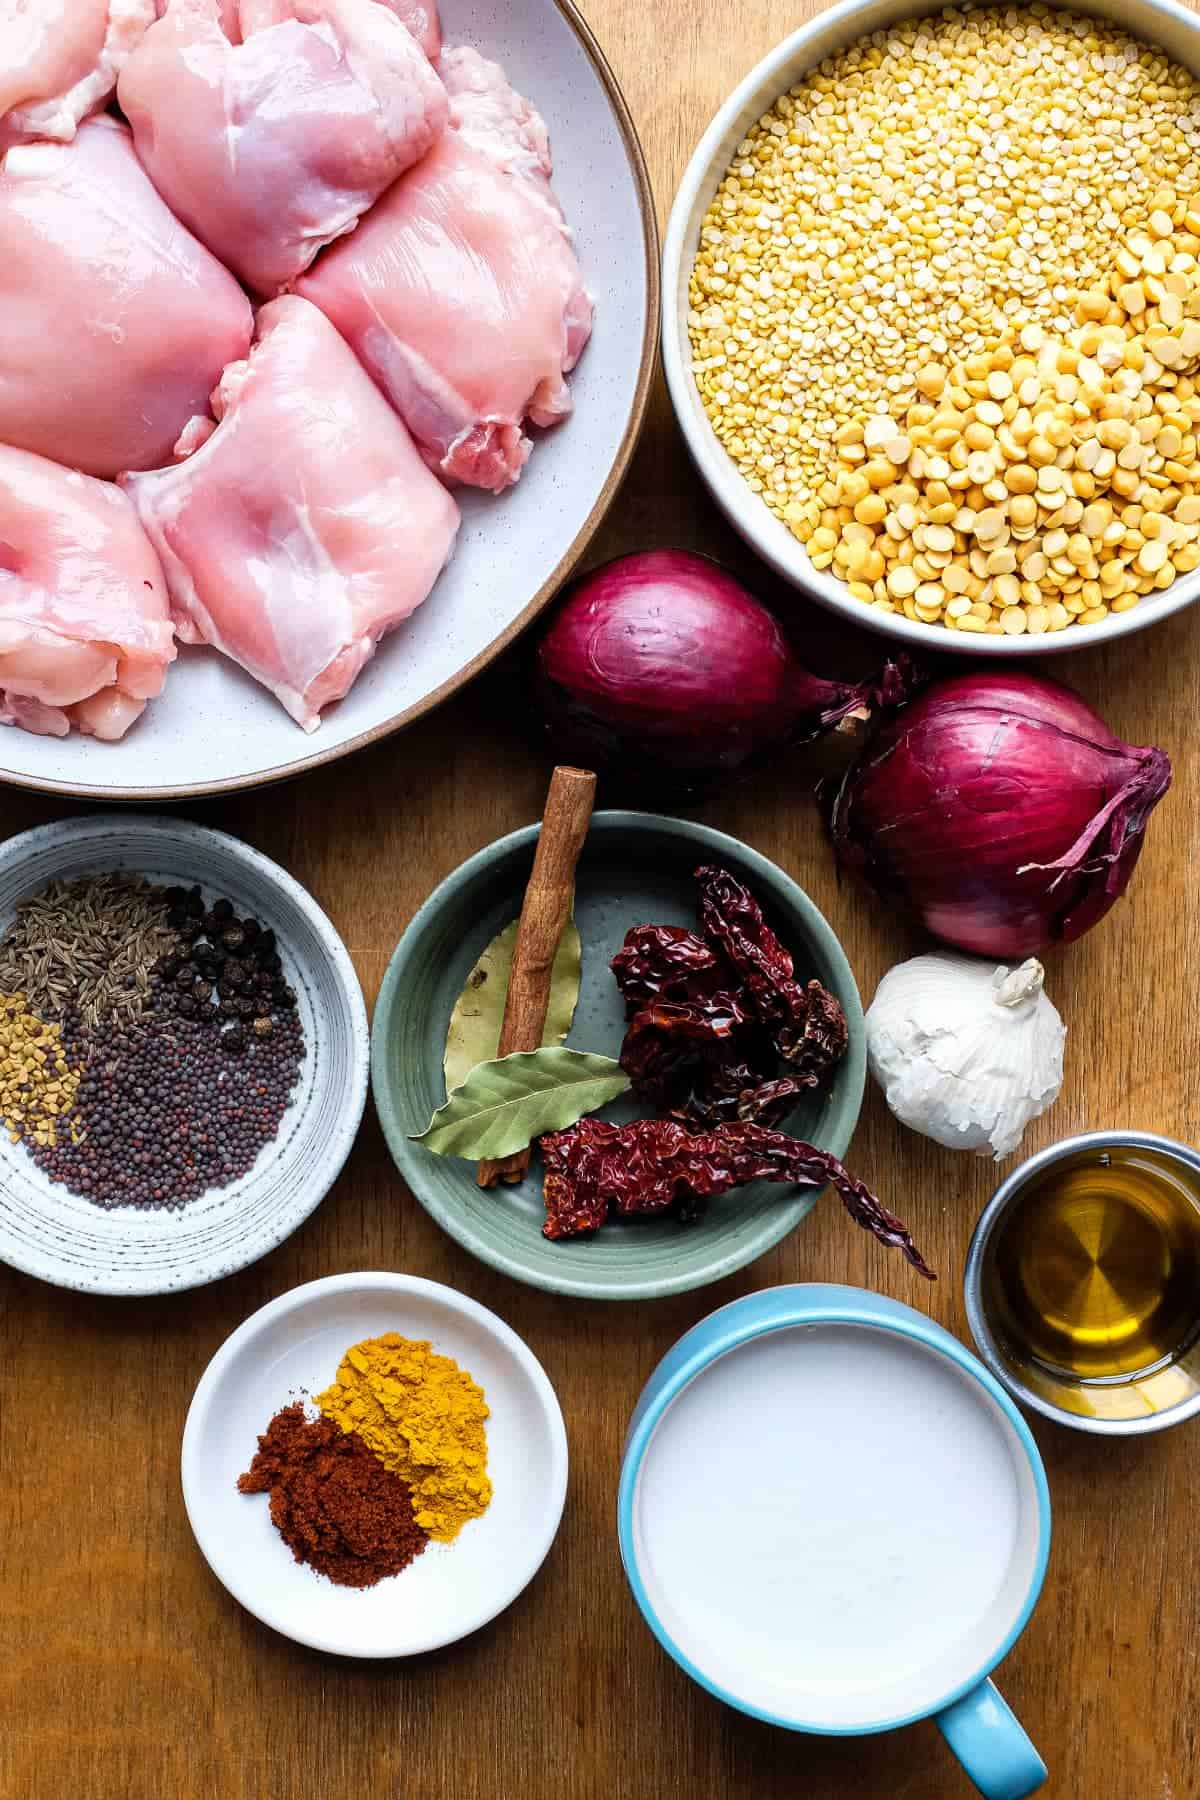 The ingredients for a chicken lentil curry including chicken, two types of lentils, onion, whole spices, ground spices, garlic, chillies and coconut milk